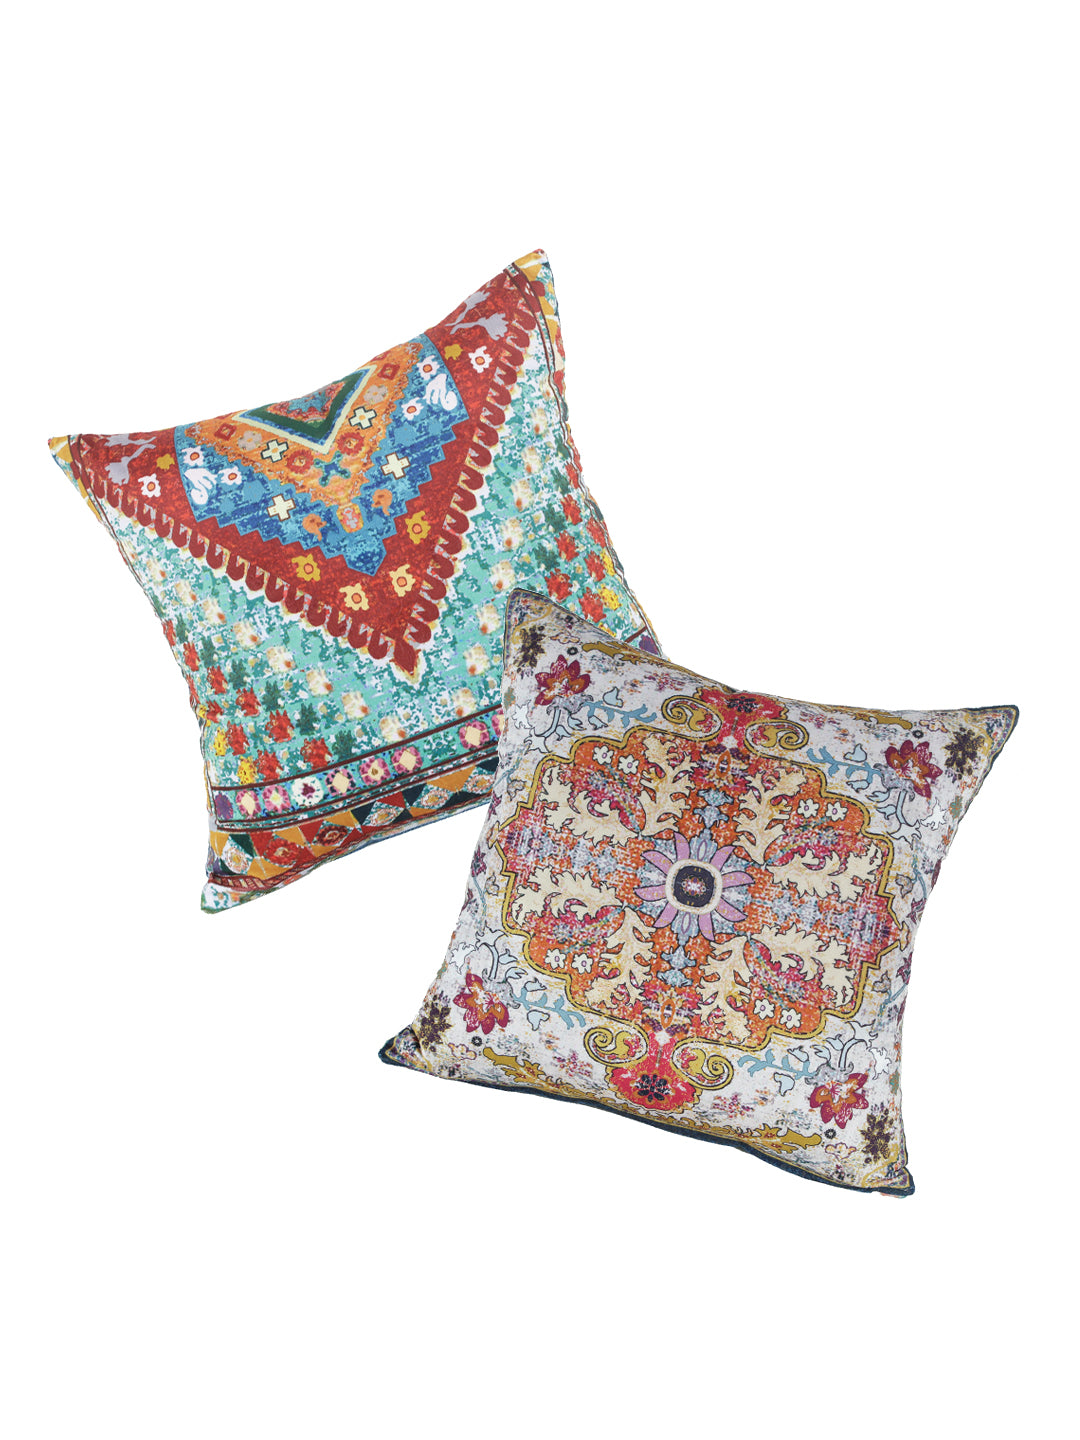 Multicolored Set of 2 Floral Square Cushion Covers